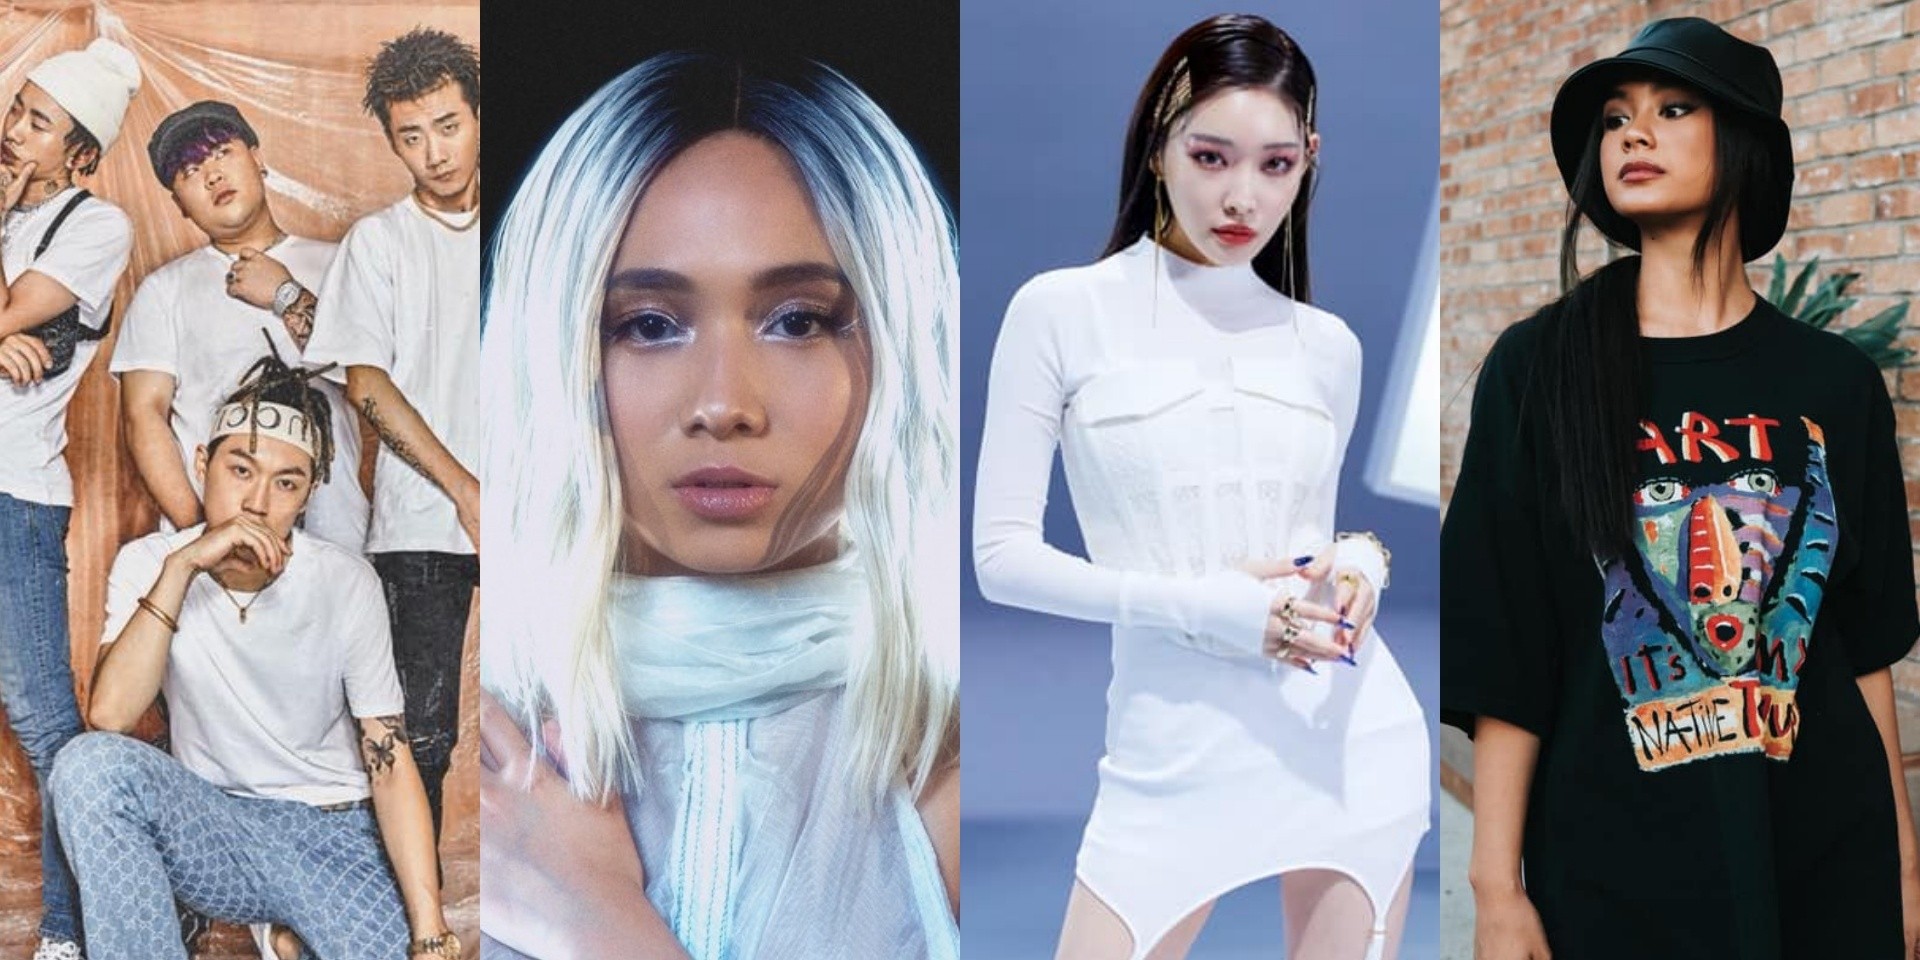 88rising returns with ASIA RISING: Summer Edition on TikTok, featuring Higher Brothers, NIKI, Chung Ha, Ylona Garcia, and more